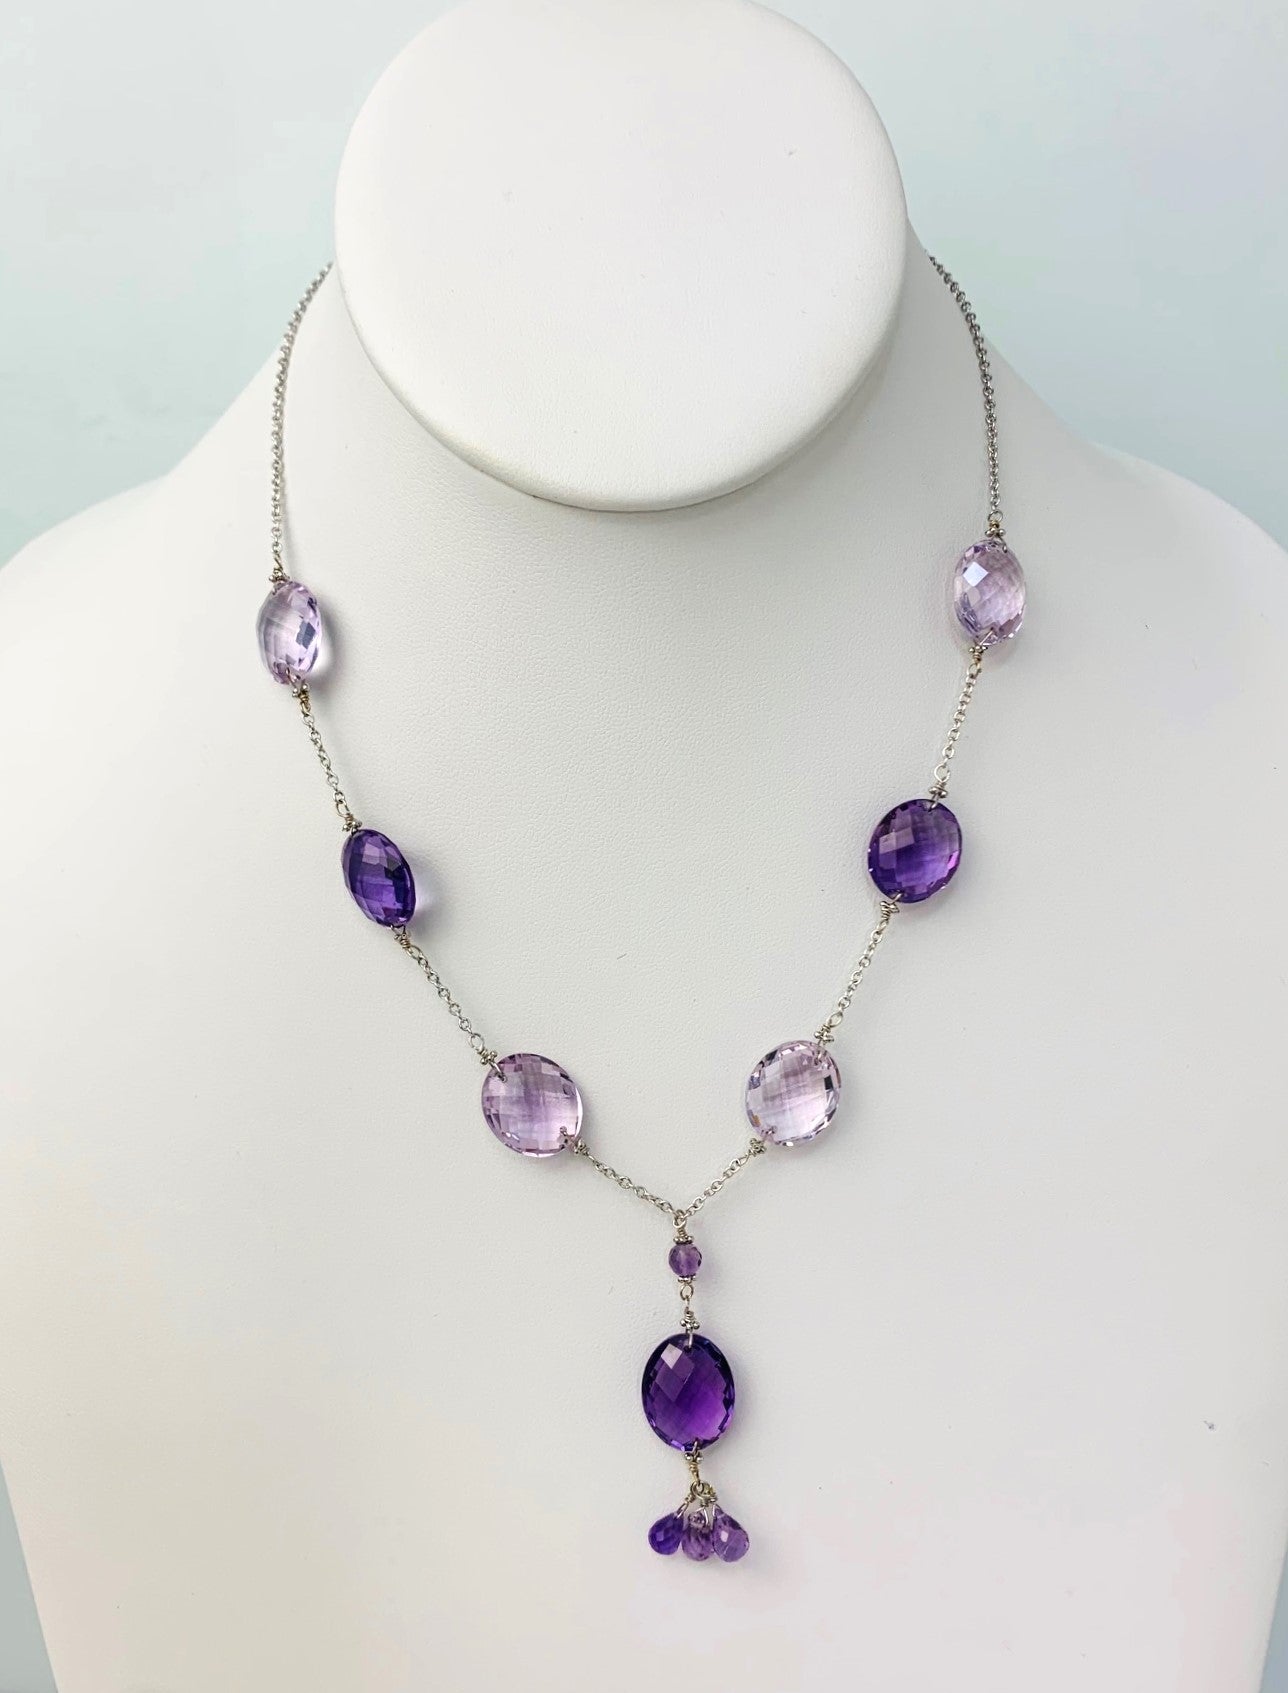 Clearance Sale! - 16-17"  Amethyst Station Necklace With Oval Checkerboard And 3 Briolette Tassel Drop in 14KW - NCK-375-TASTNCGM14W-AMY-17